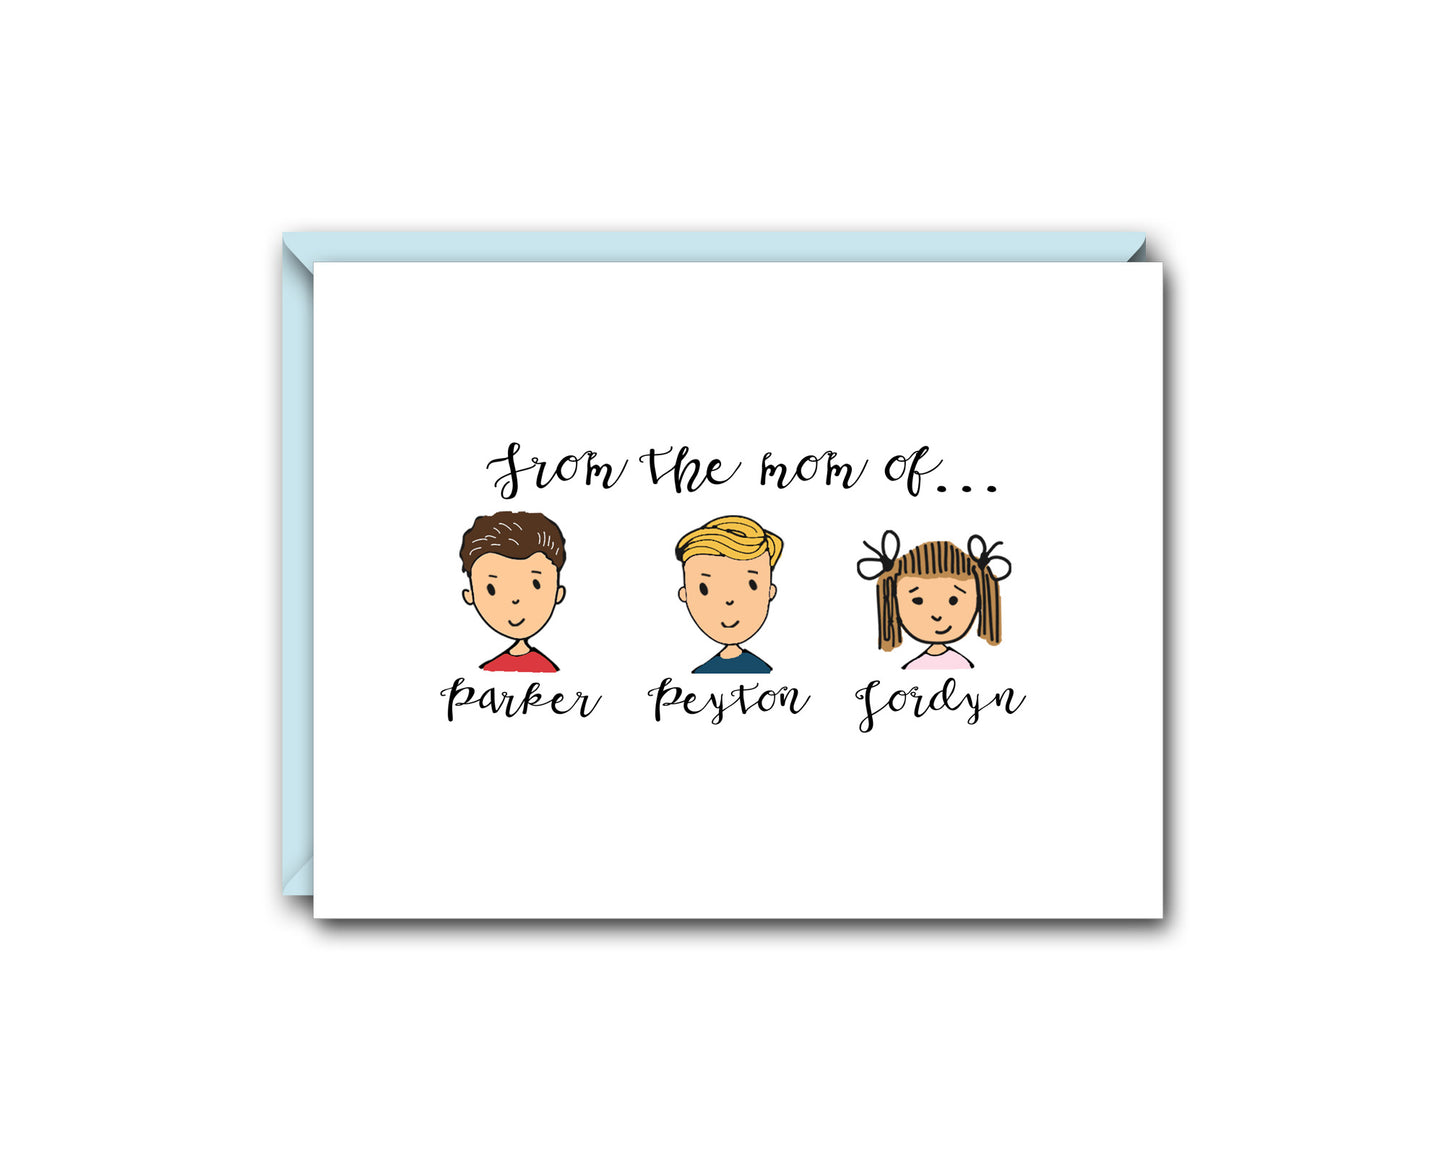 FROM THE MOM OF... THREE CHILDREN PERSONALIZED NOTE CARD SET